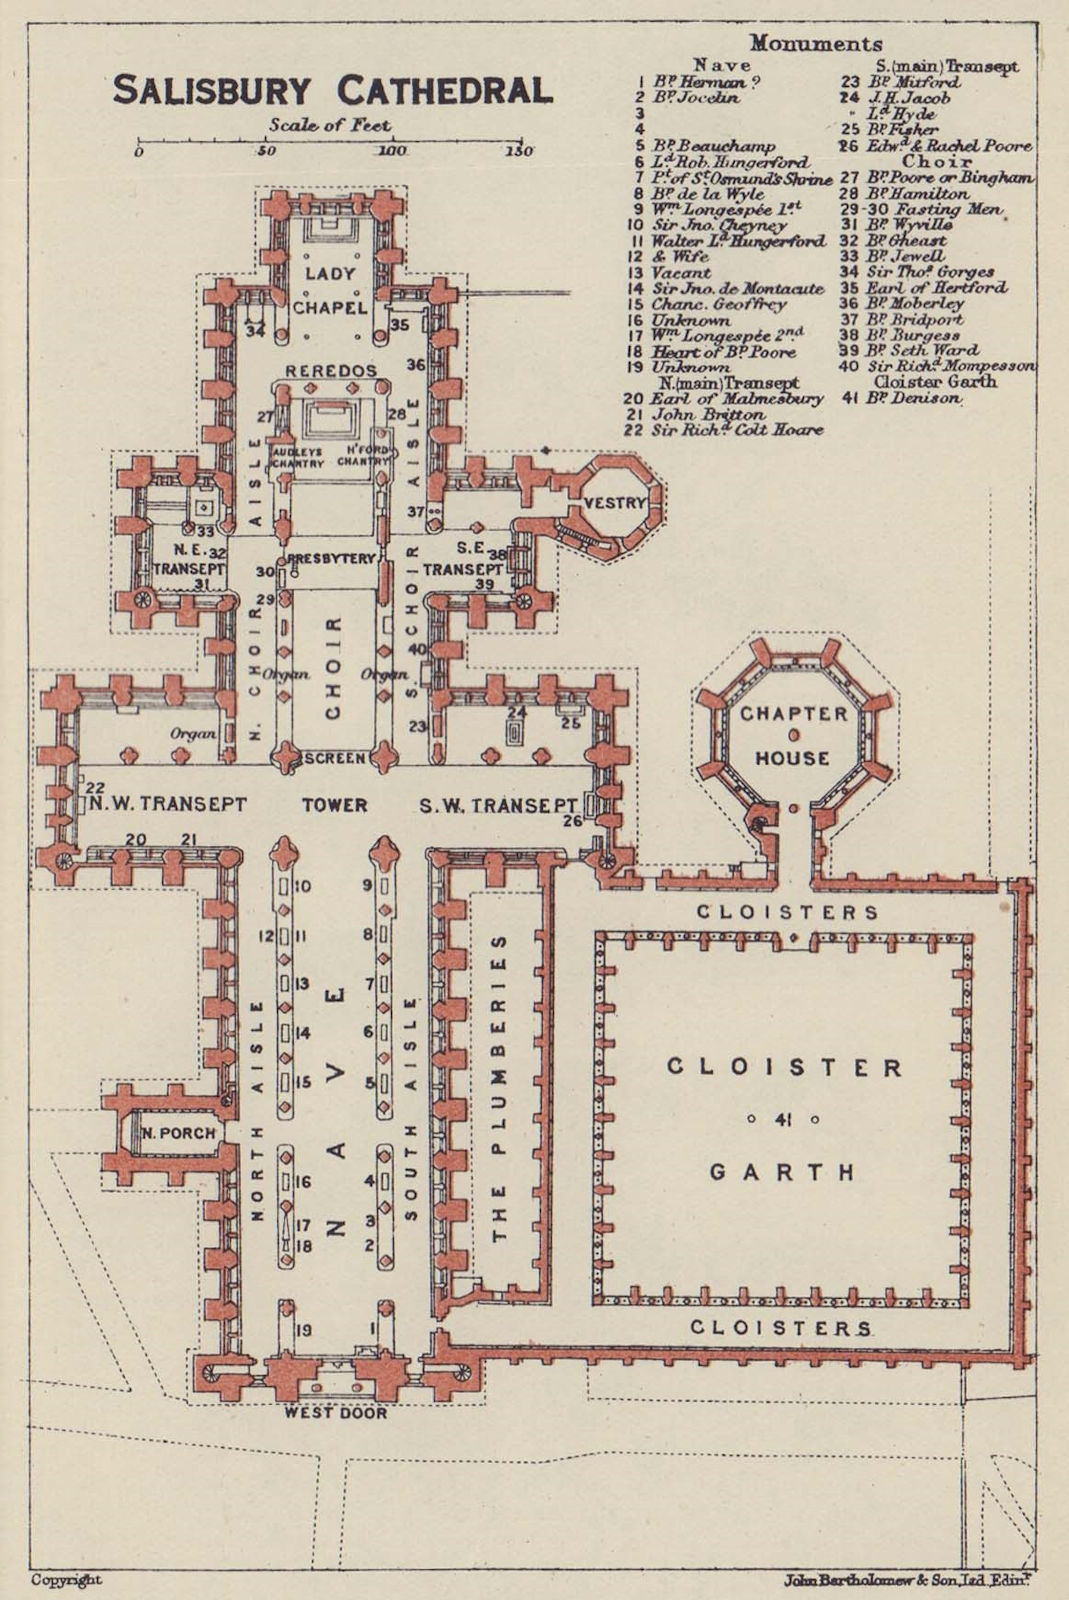 Associate Product Salisbury Cathedral ground floor plan. Wiltshire 1920 old antique map chart